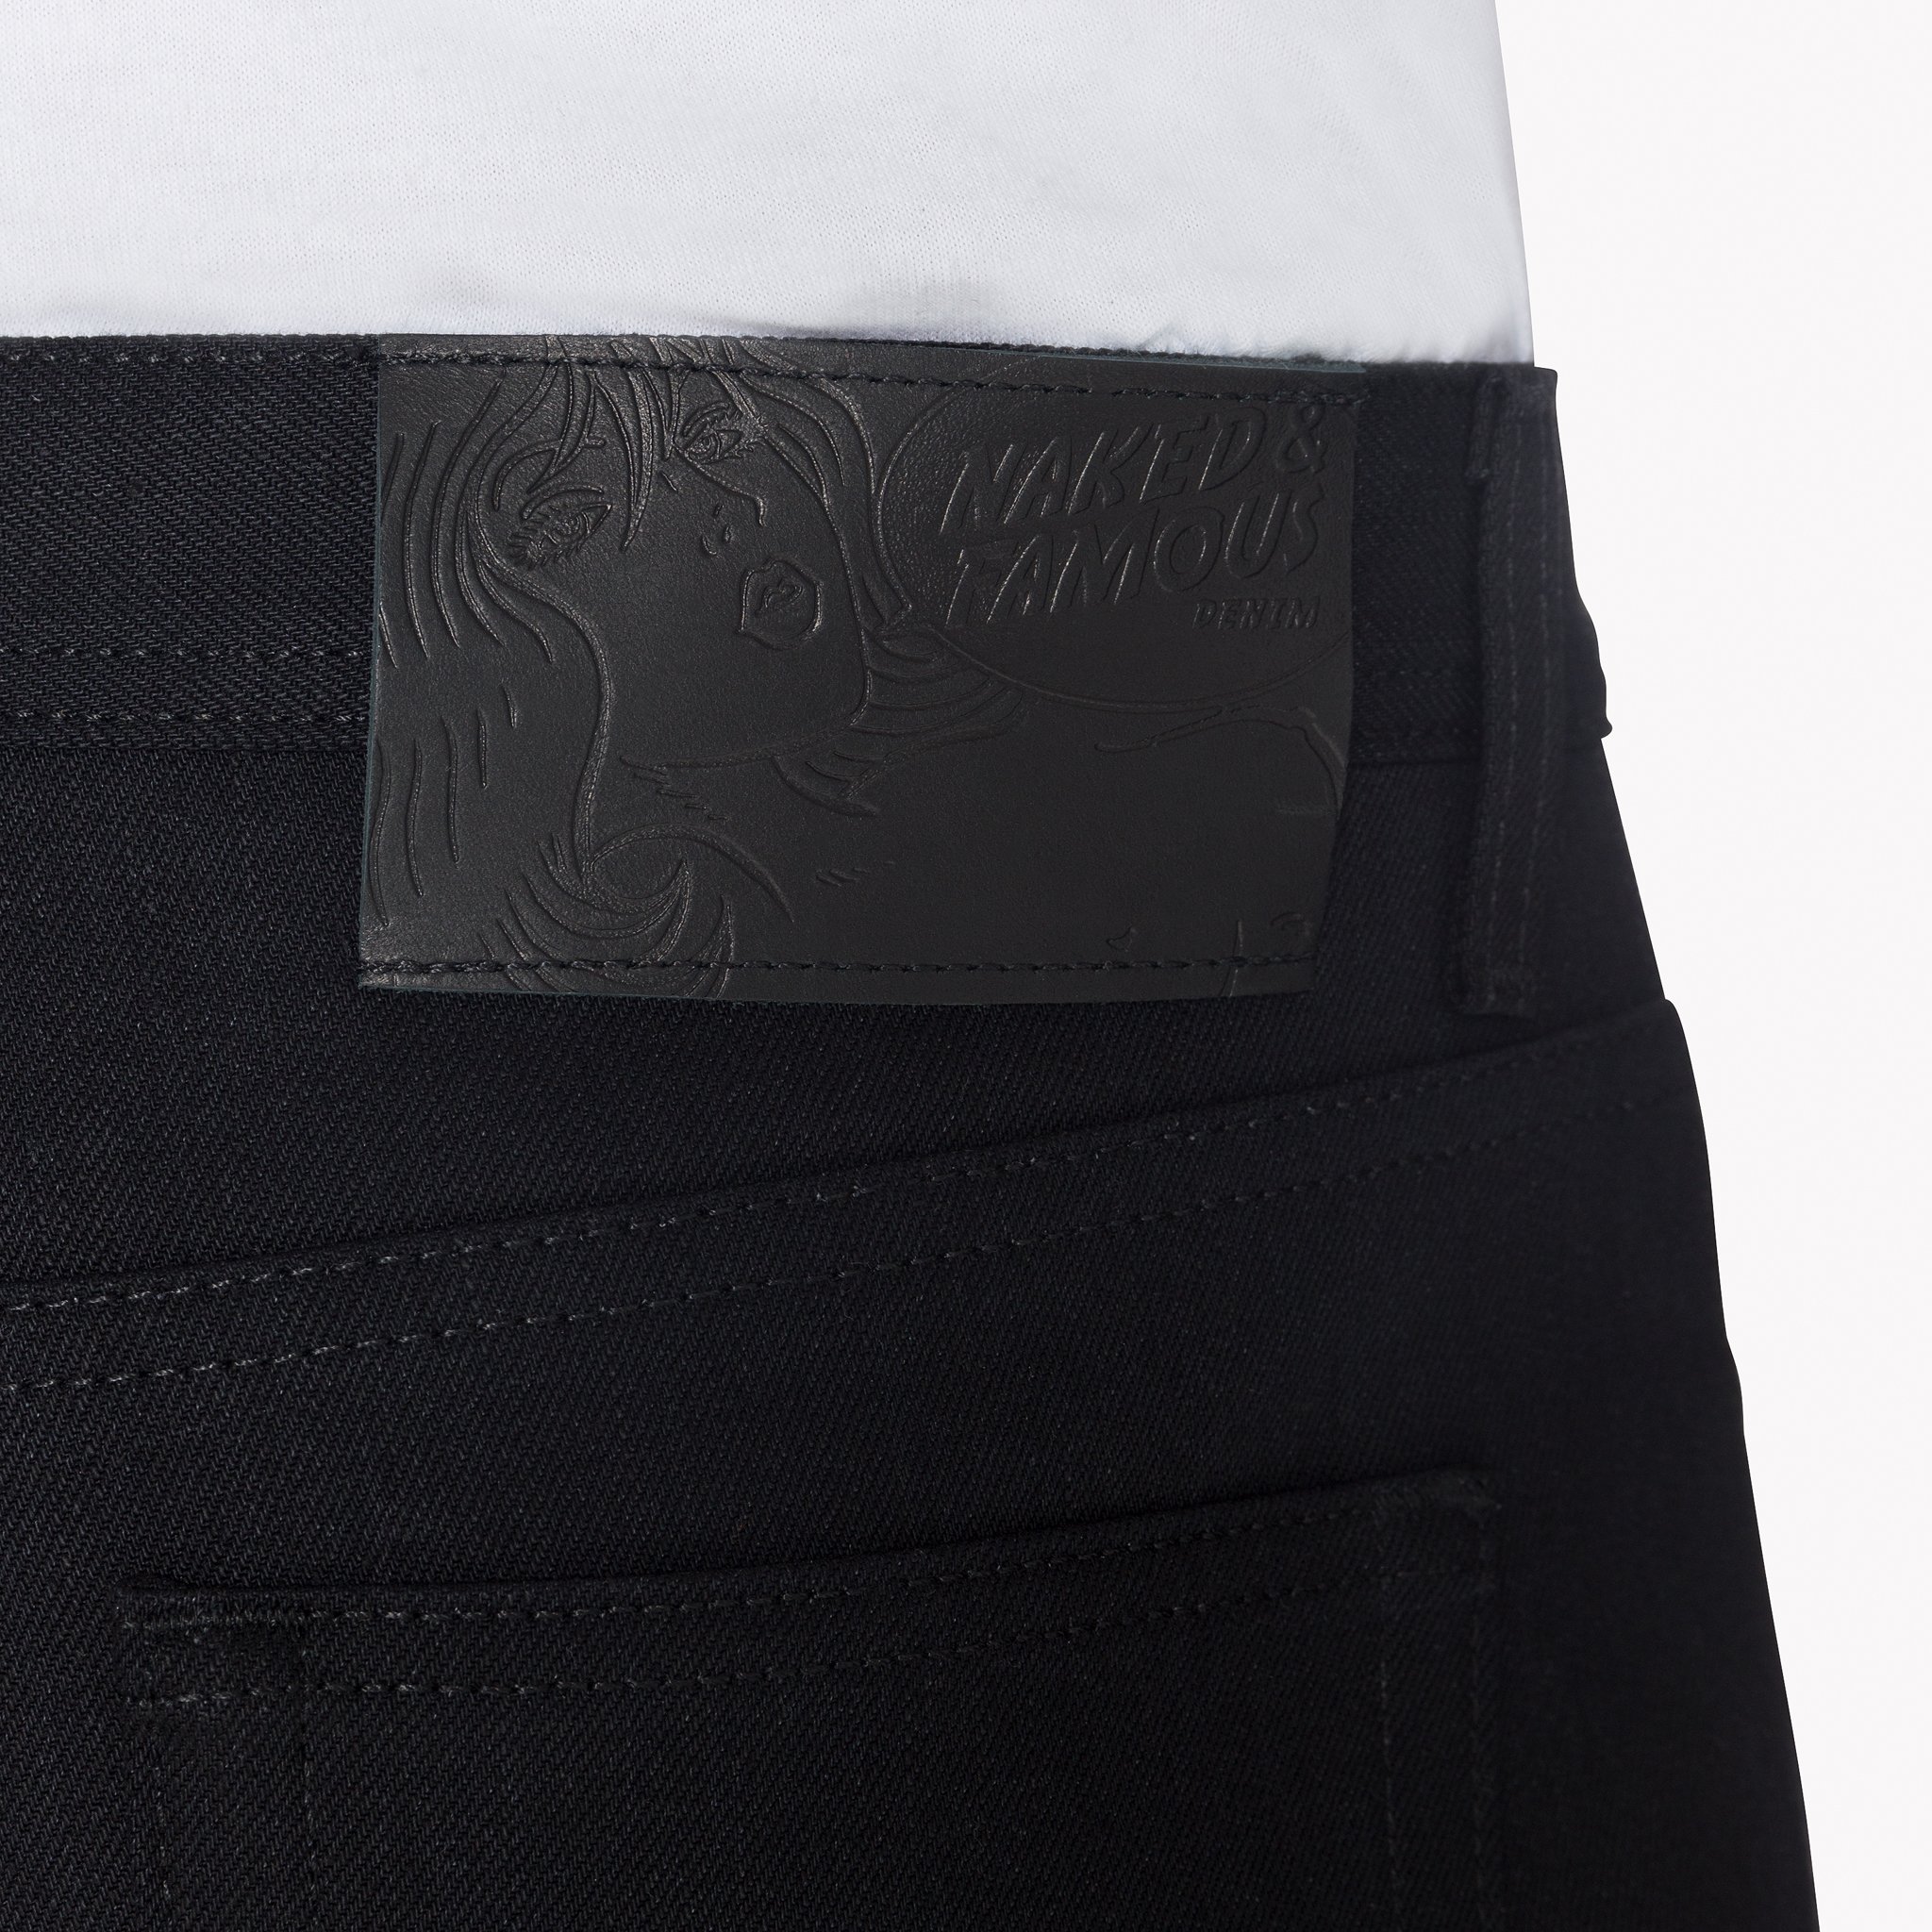  Solid Black Selvedge Jeans - leather patch 